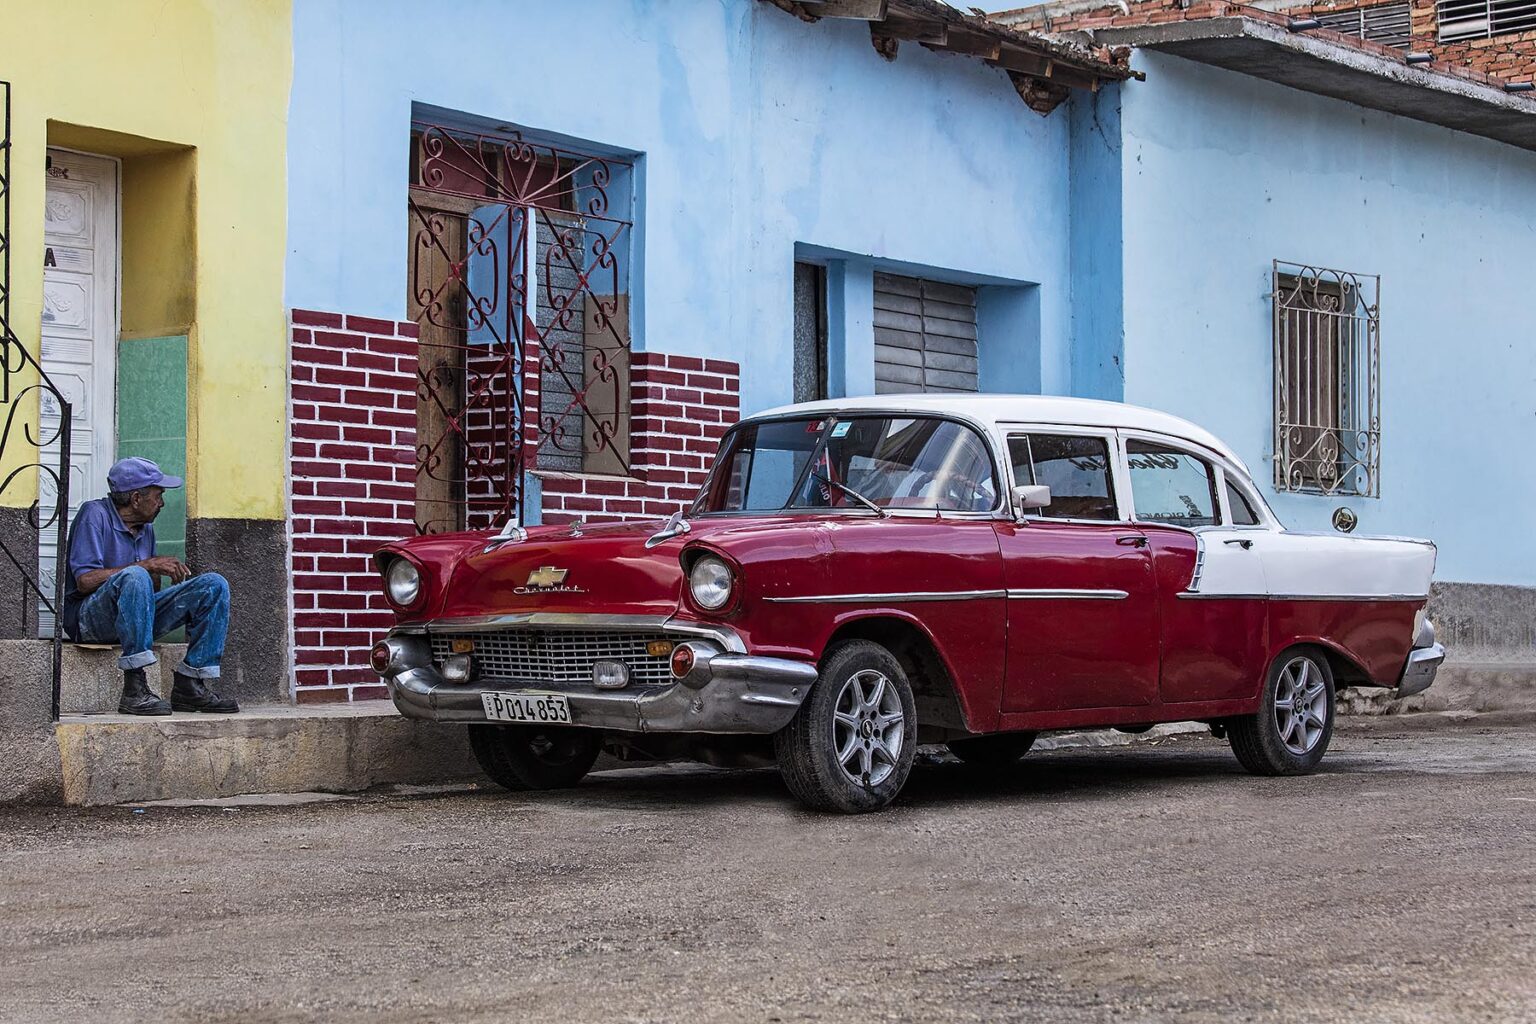 CLASSIC AMERICAN CARS are part of the charm of TRINIDAD, CUBA